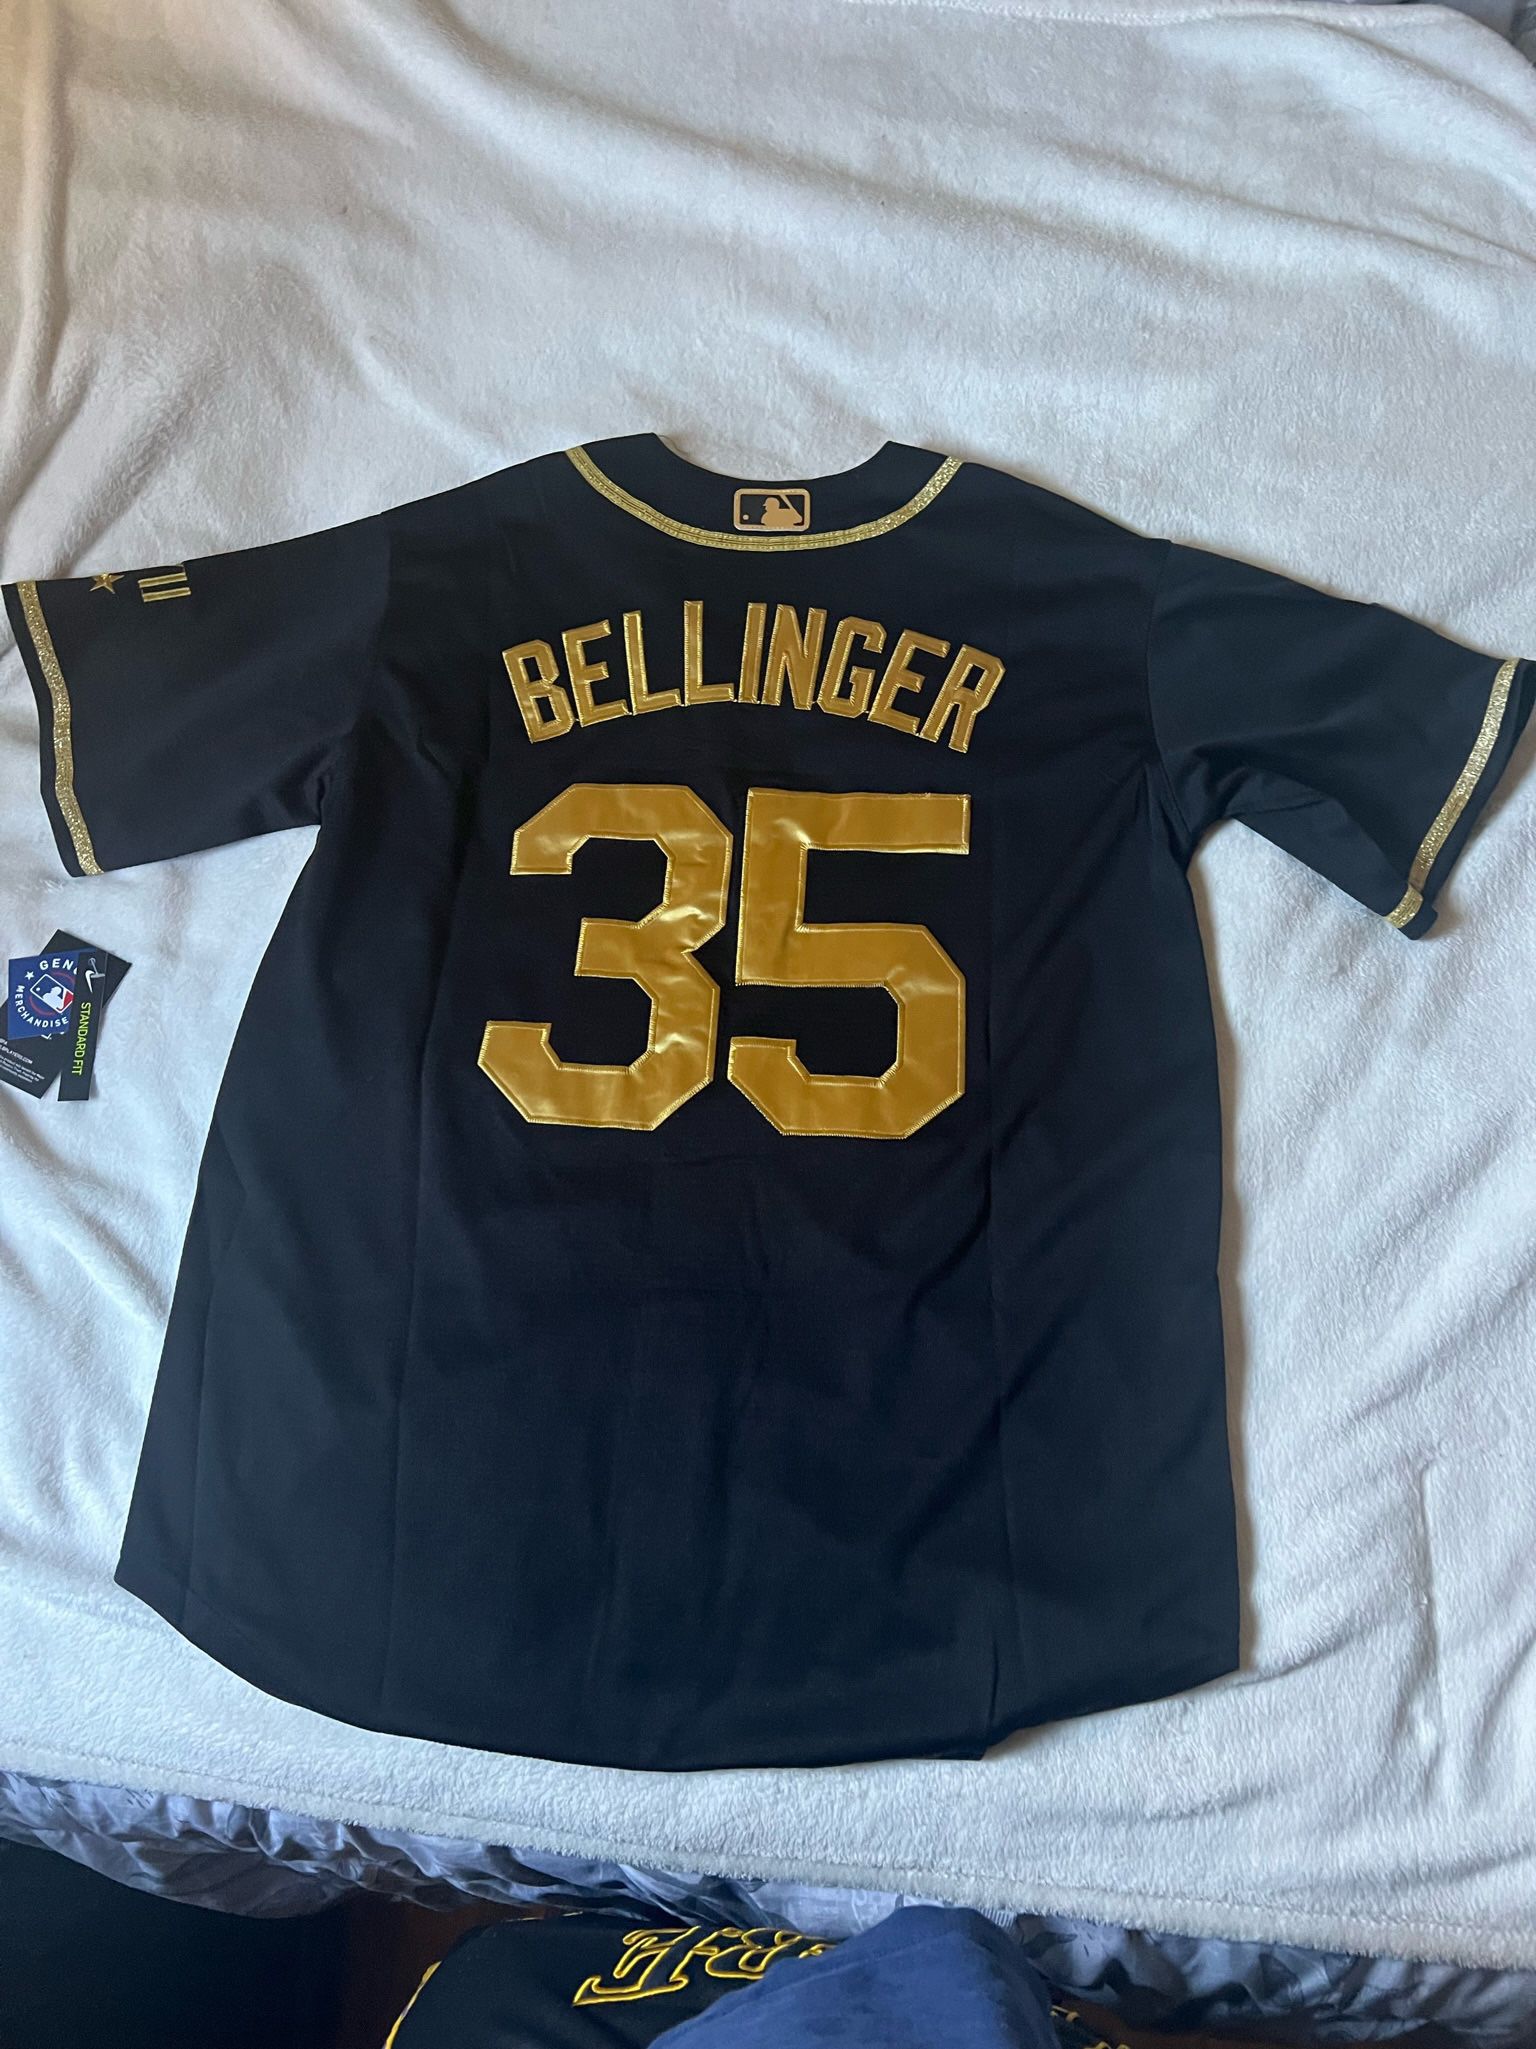 dodgers black and gold jersey